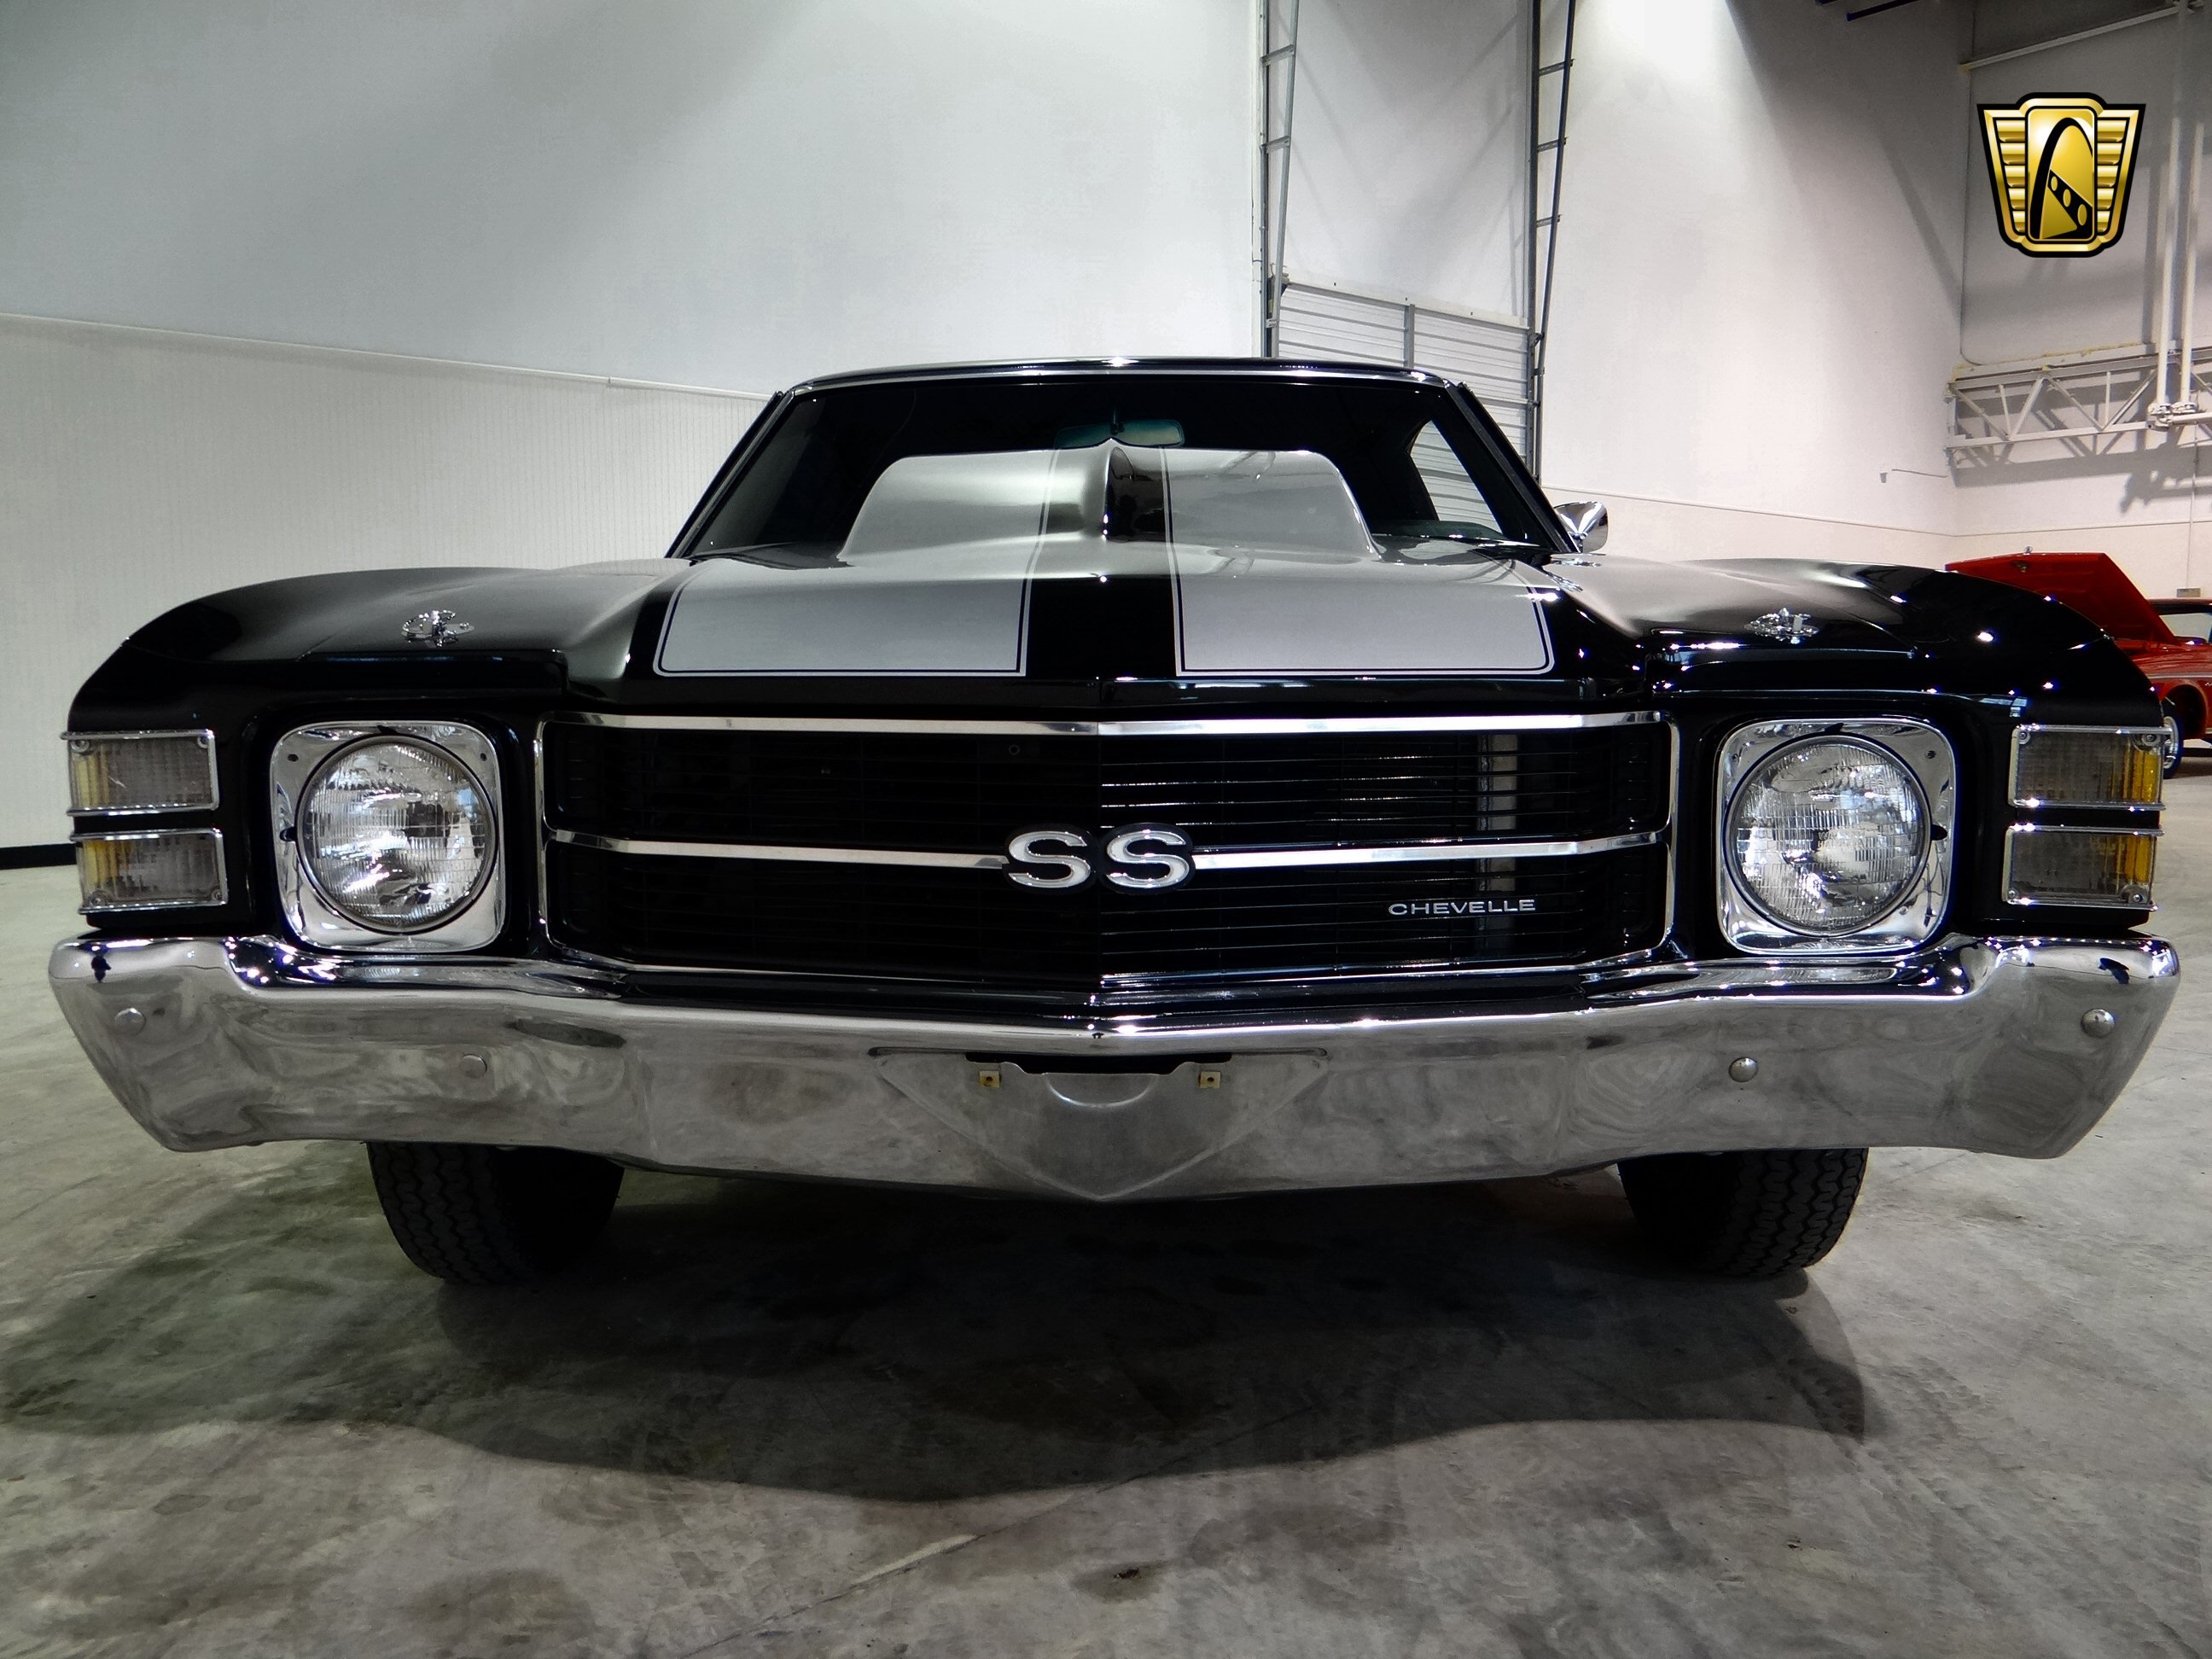 1971, Chevrolet, Chevelle, S s, Clone, Muscle, Hot, Rod, Rods, Classic Wallpaper